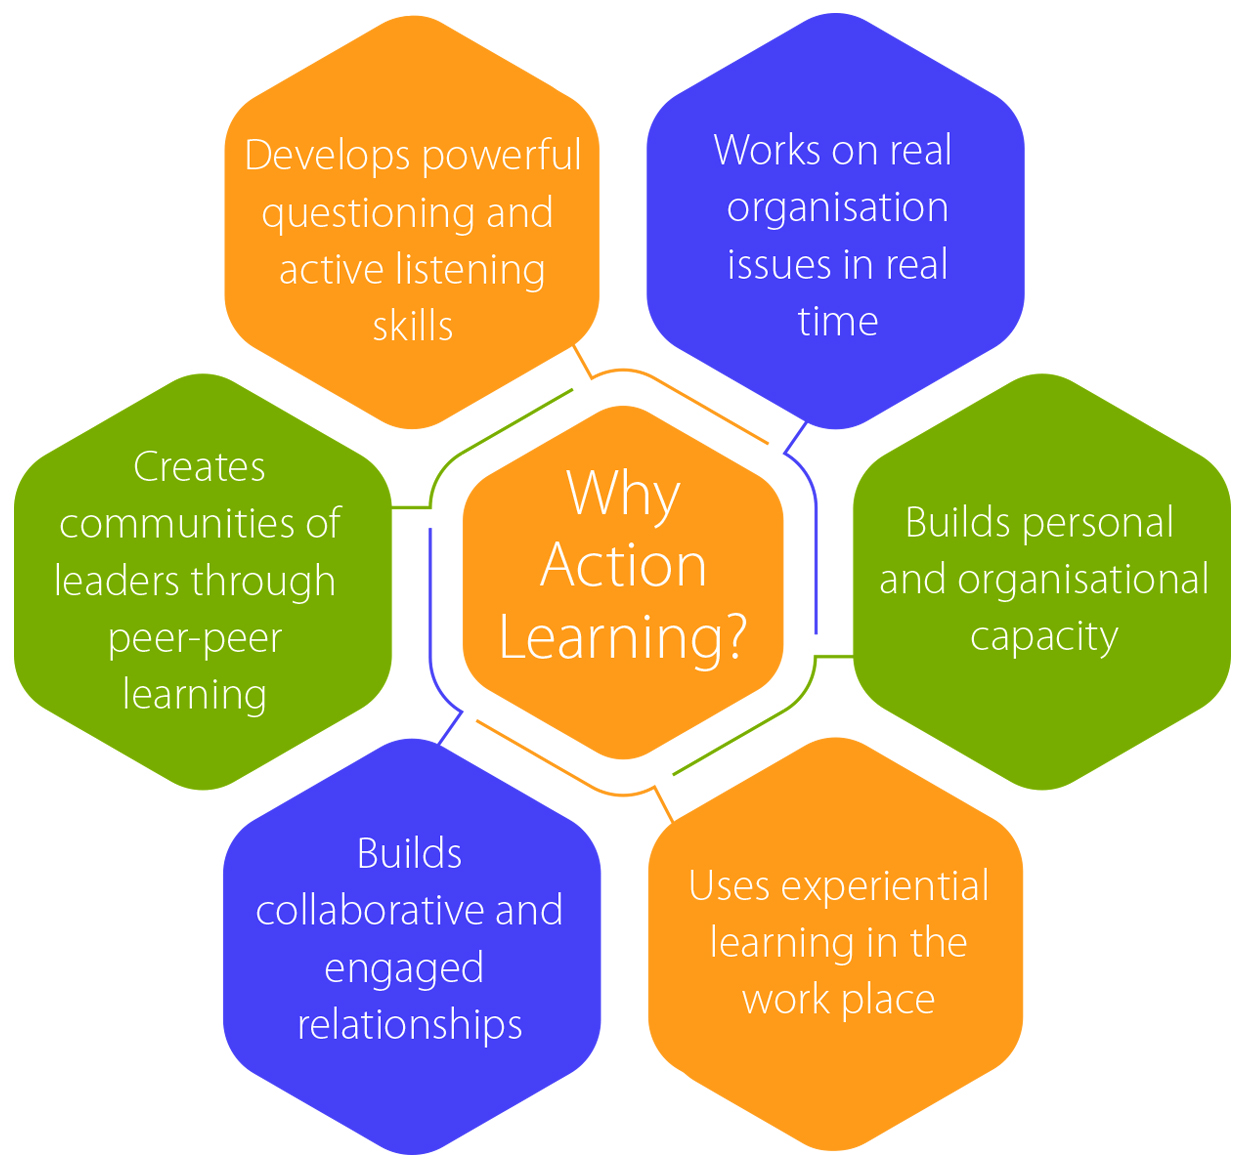 action learning research definition